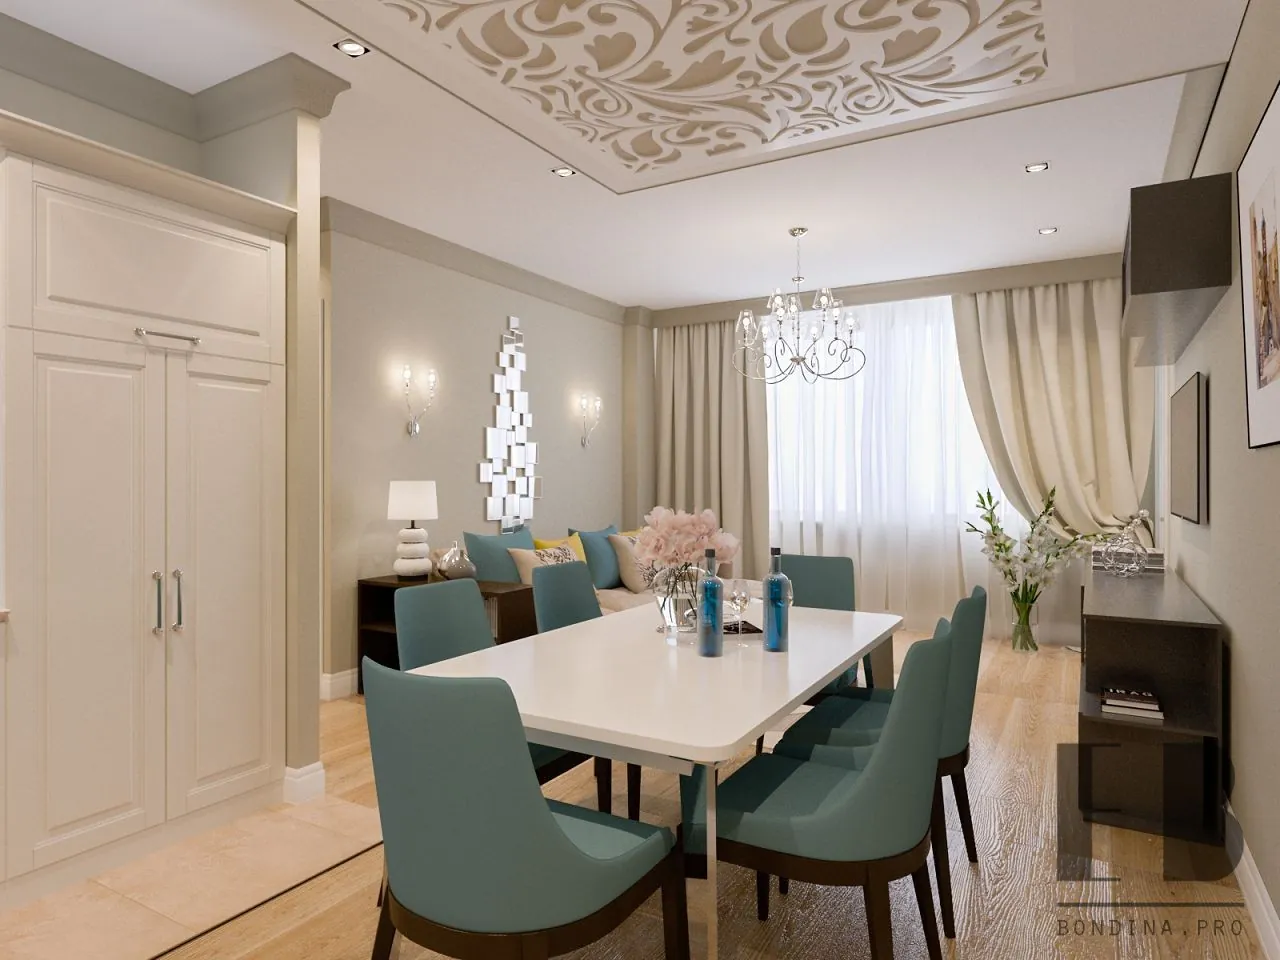 Beautiful and Tender dining room interior in beige and blue colors